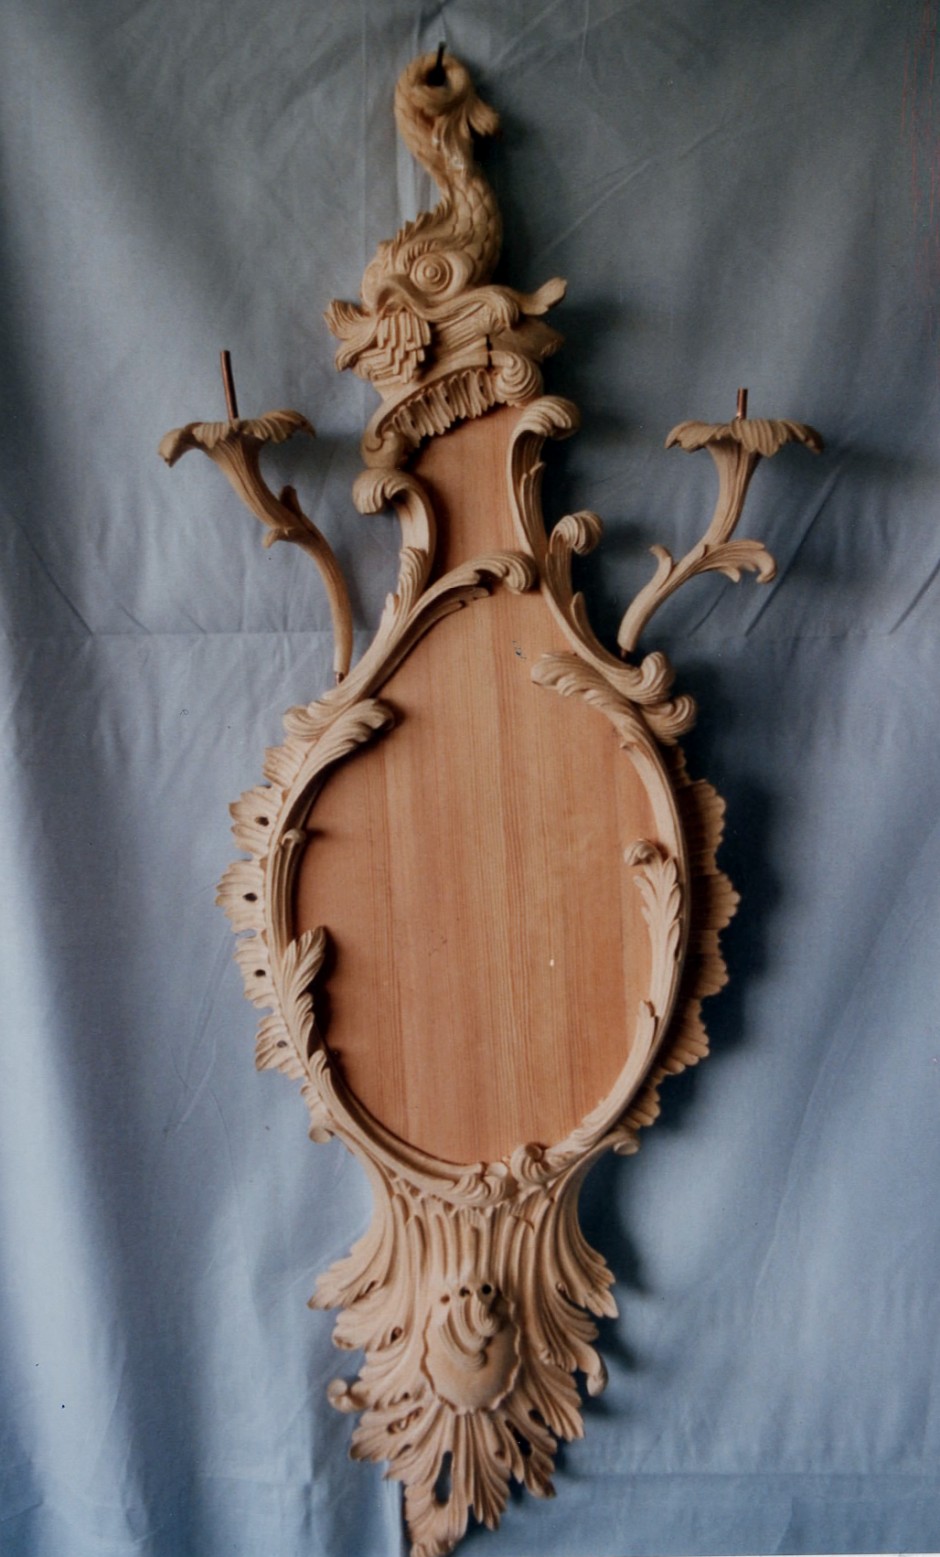 A Finished Girondelle Style Mirror Complete With Arms.  - girondelle style mirror candle